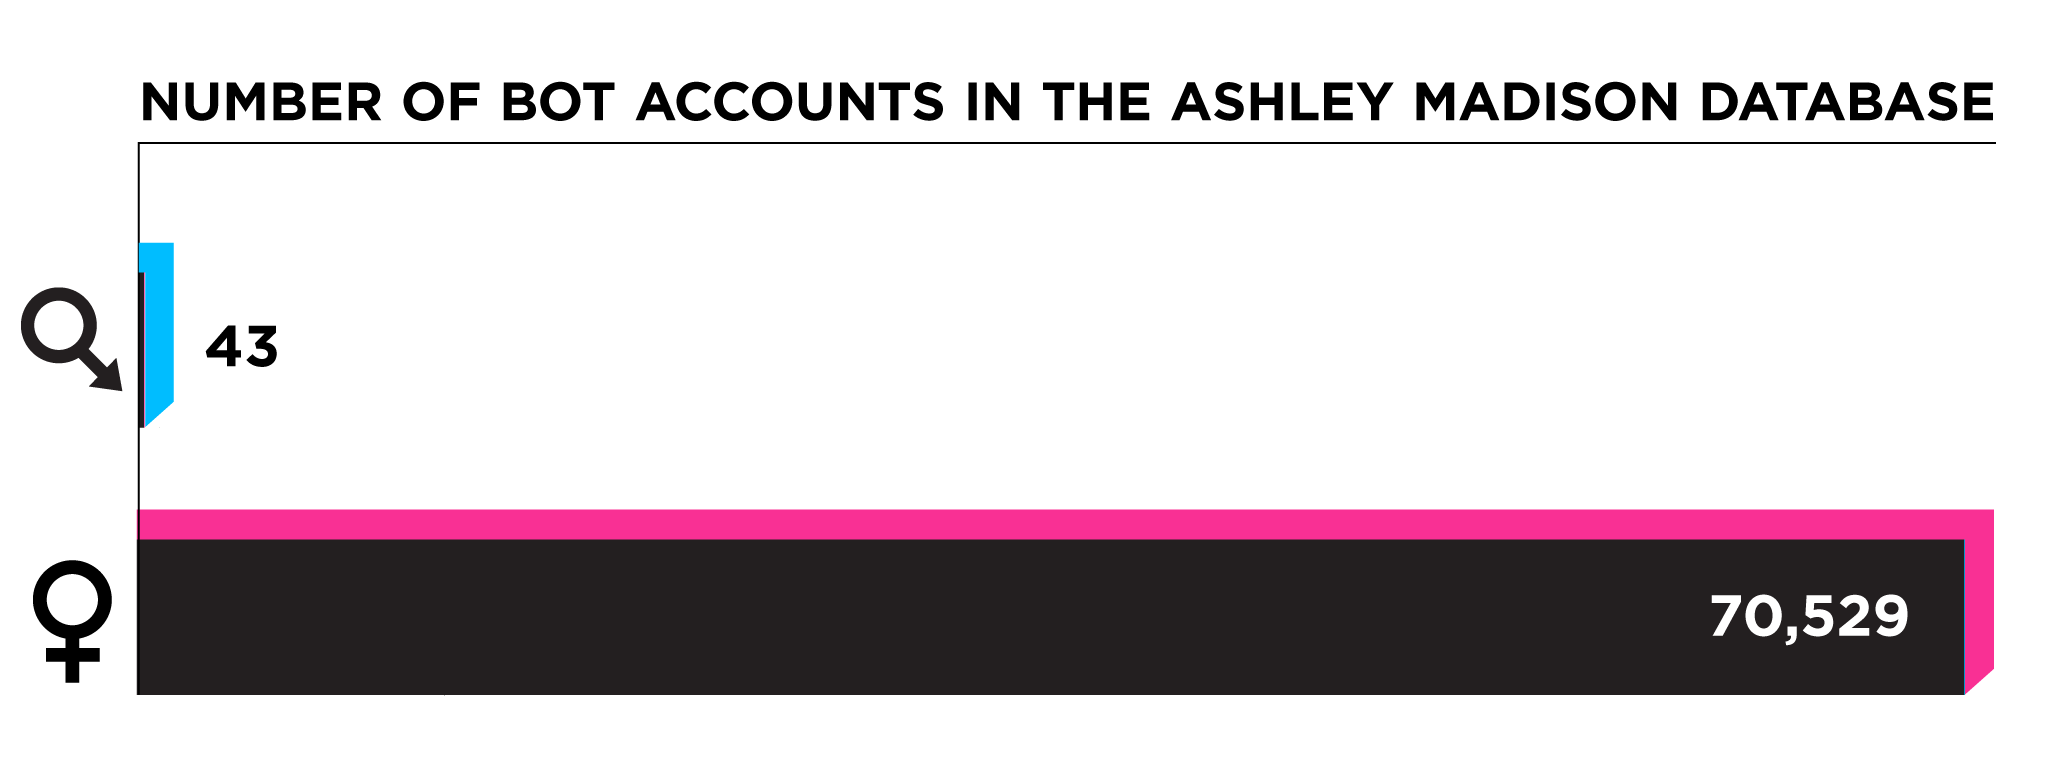 Ashley Madison Code Shows More Women And More Bots